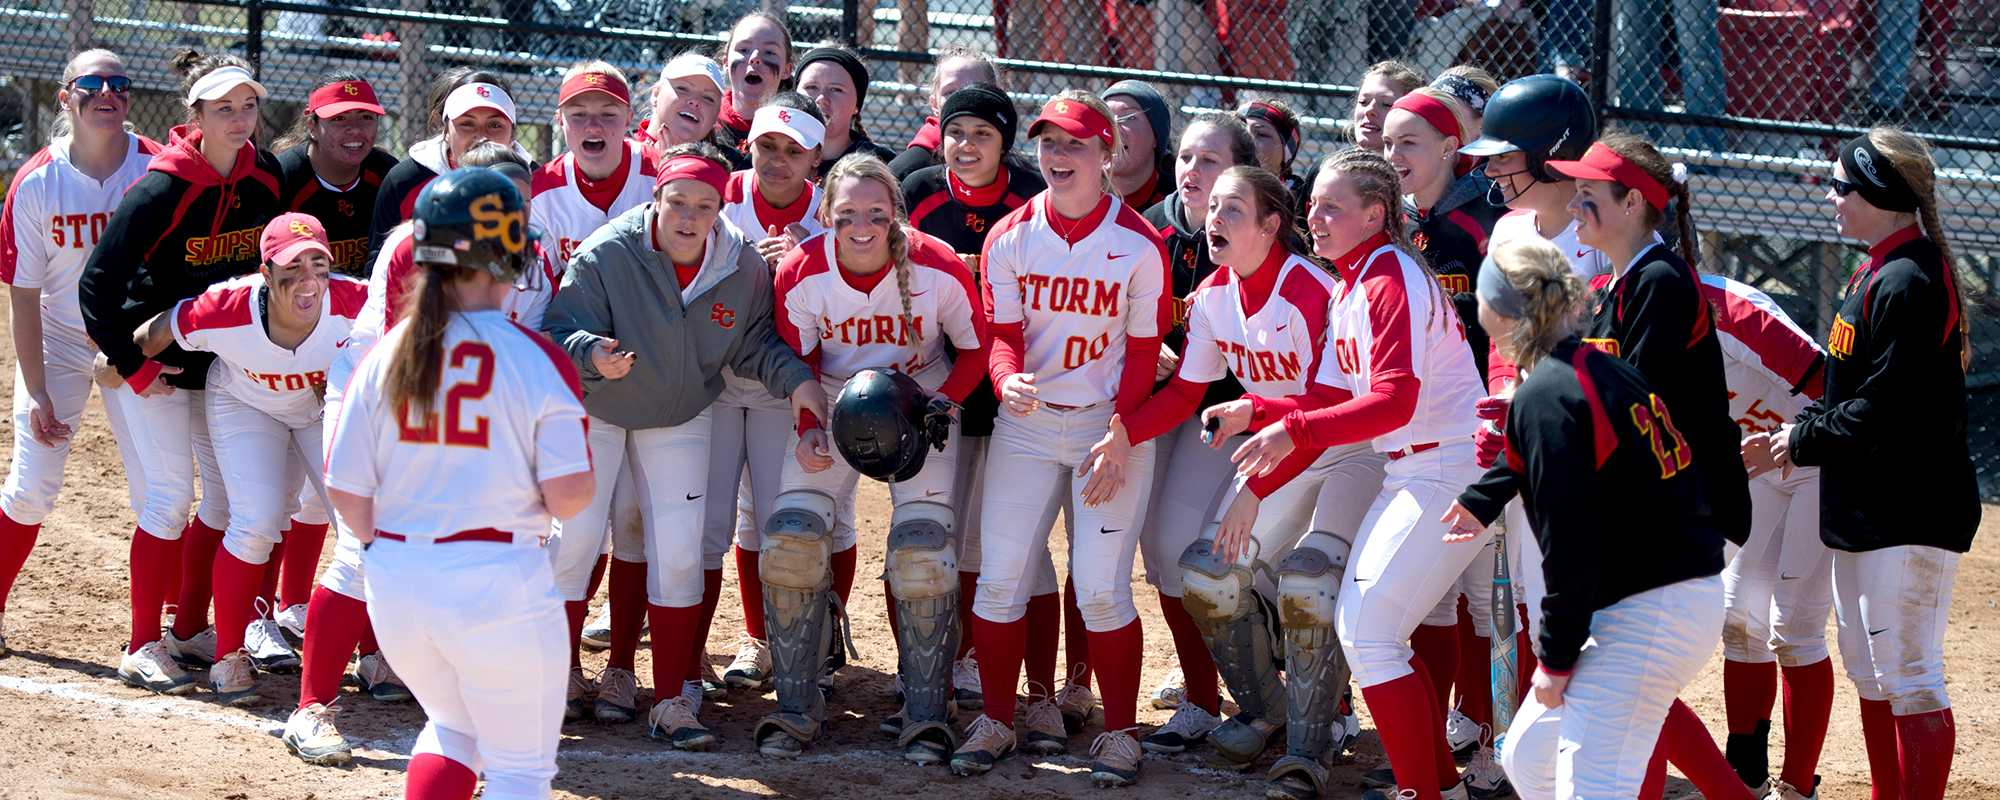 Sara Trent had two home runs on Saturday for the Storm.